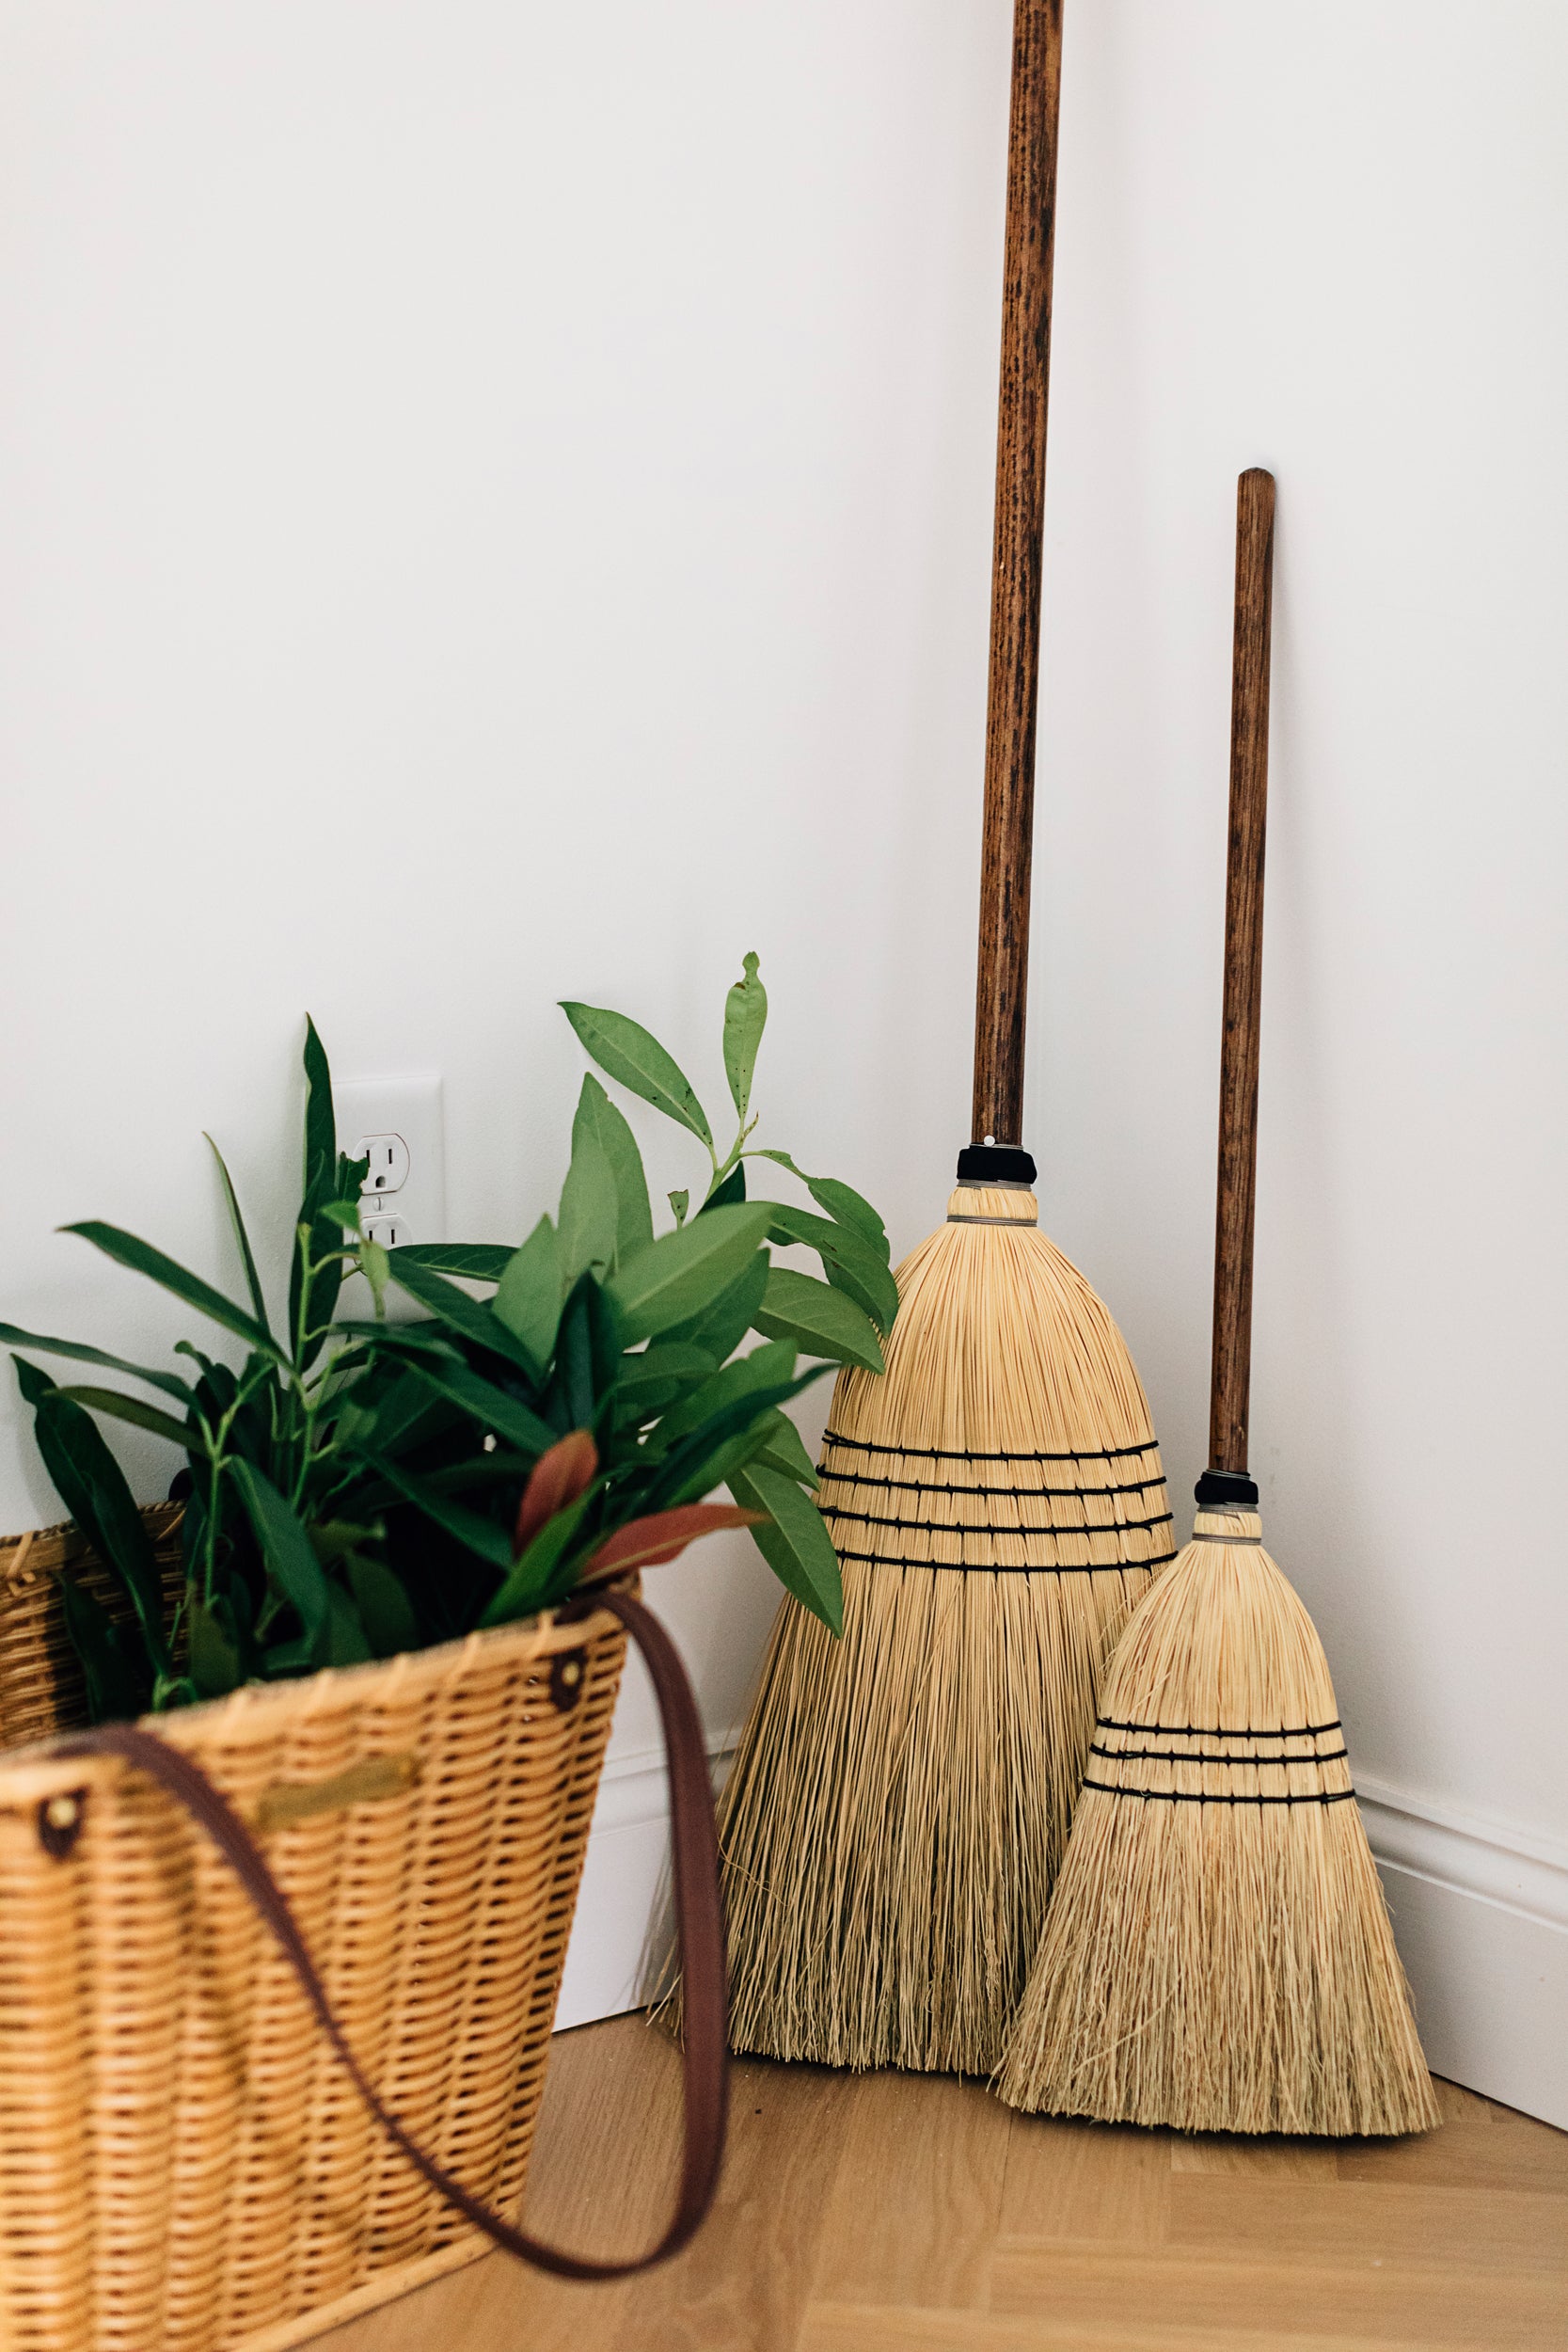 The Everyday Broom Next to the Child's Broom